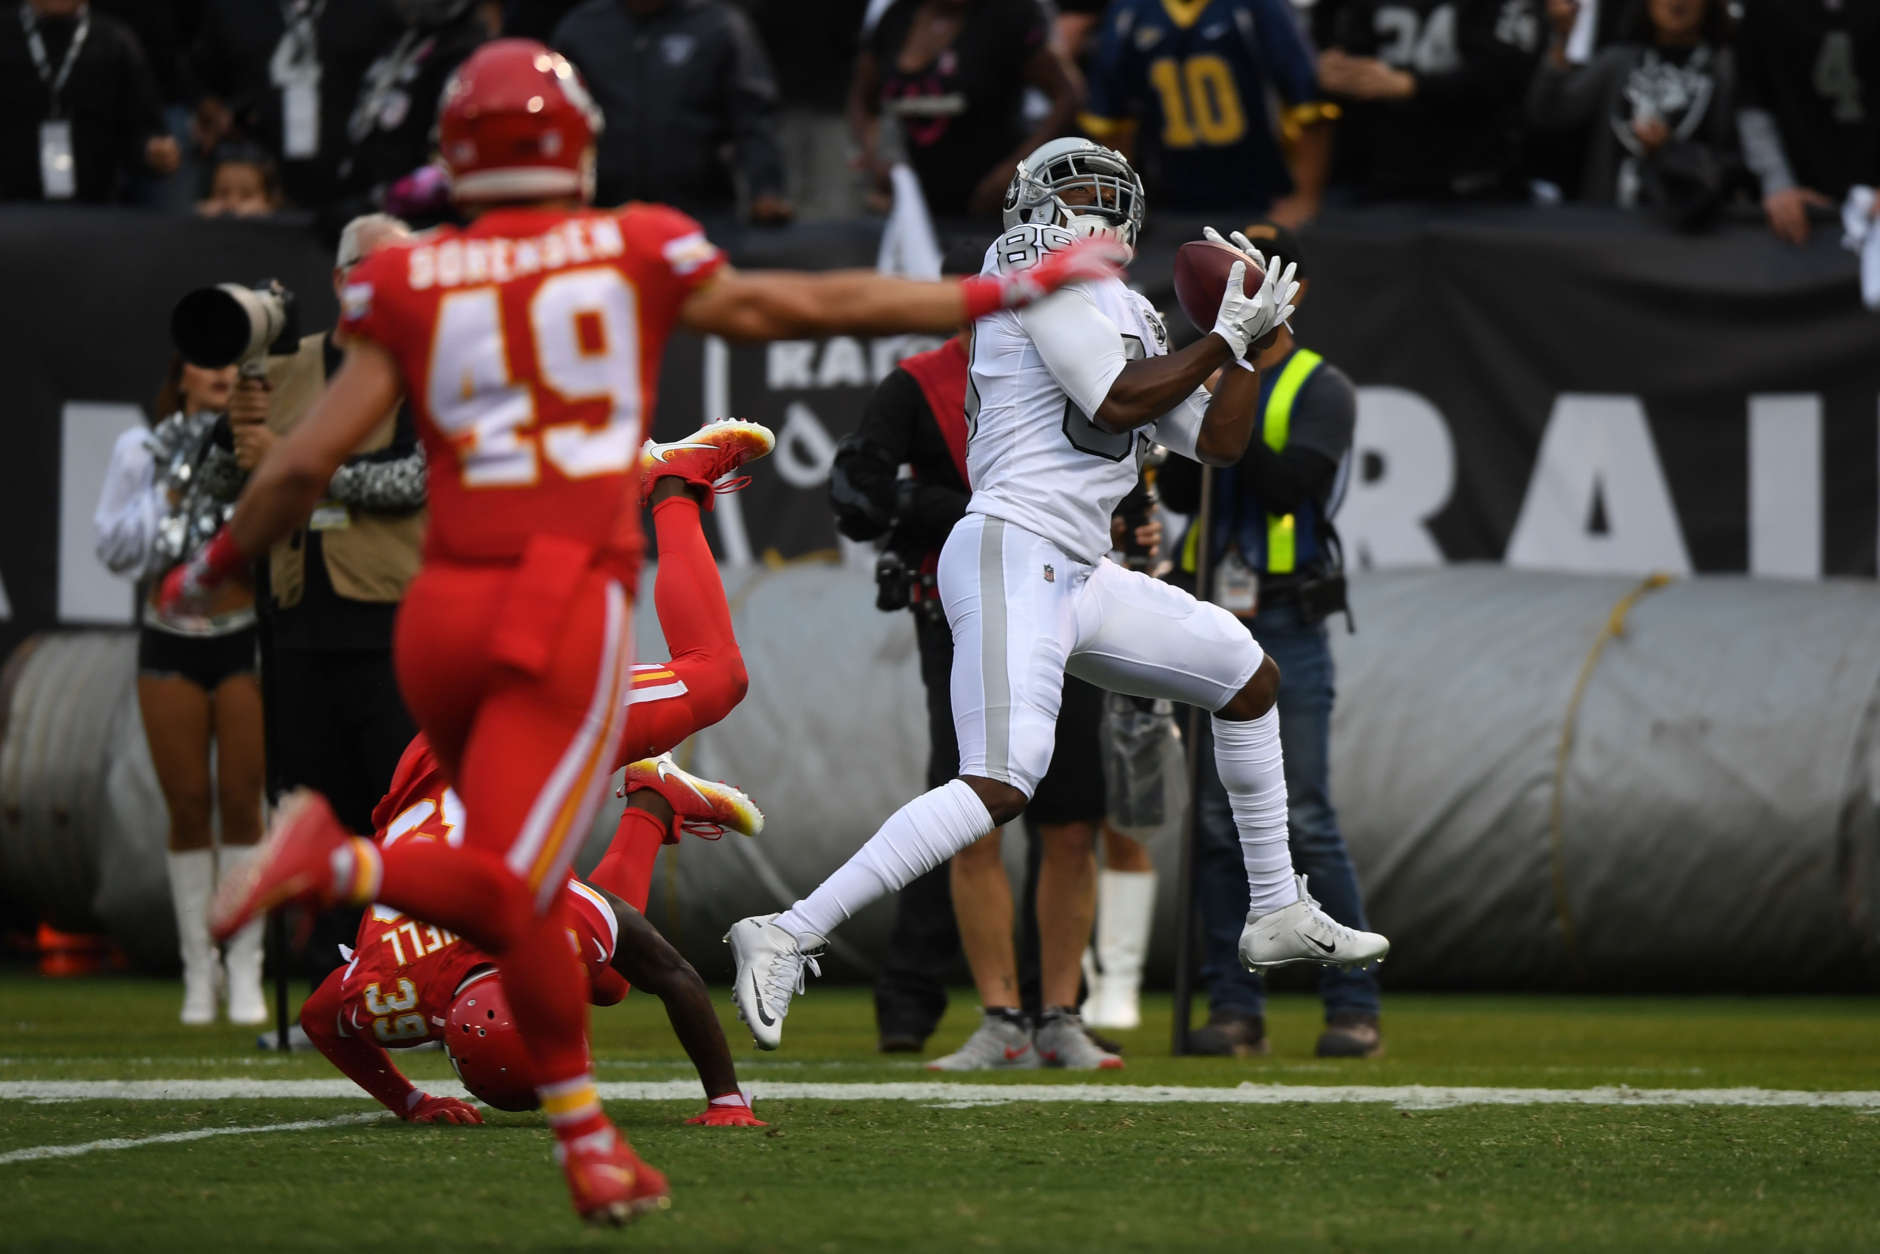 OAKLAND, CA - OCTOBER 19:  Amari Cooper #89 of the Oakland Raiders catches a 38-yard pass for a touchdown against the Kansas City Chiefs during their NFL game at Oakland-Alameda County Coliseum on October 19, 2017 in Oakland, California.  (Photo by Thearon W. Henderson/Getty Images)